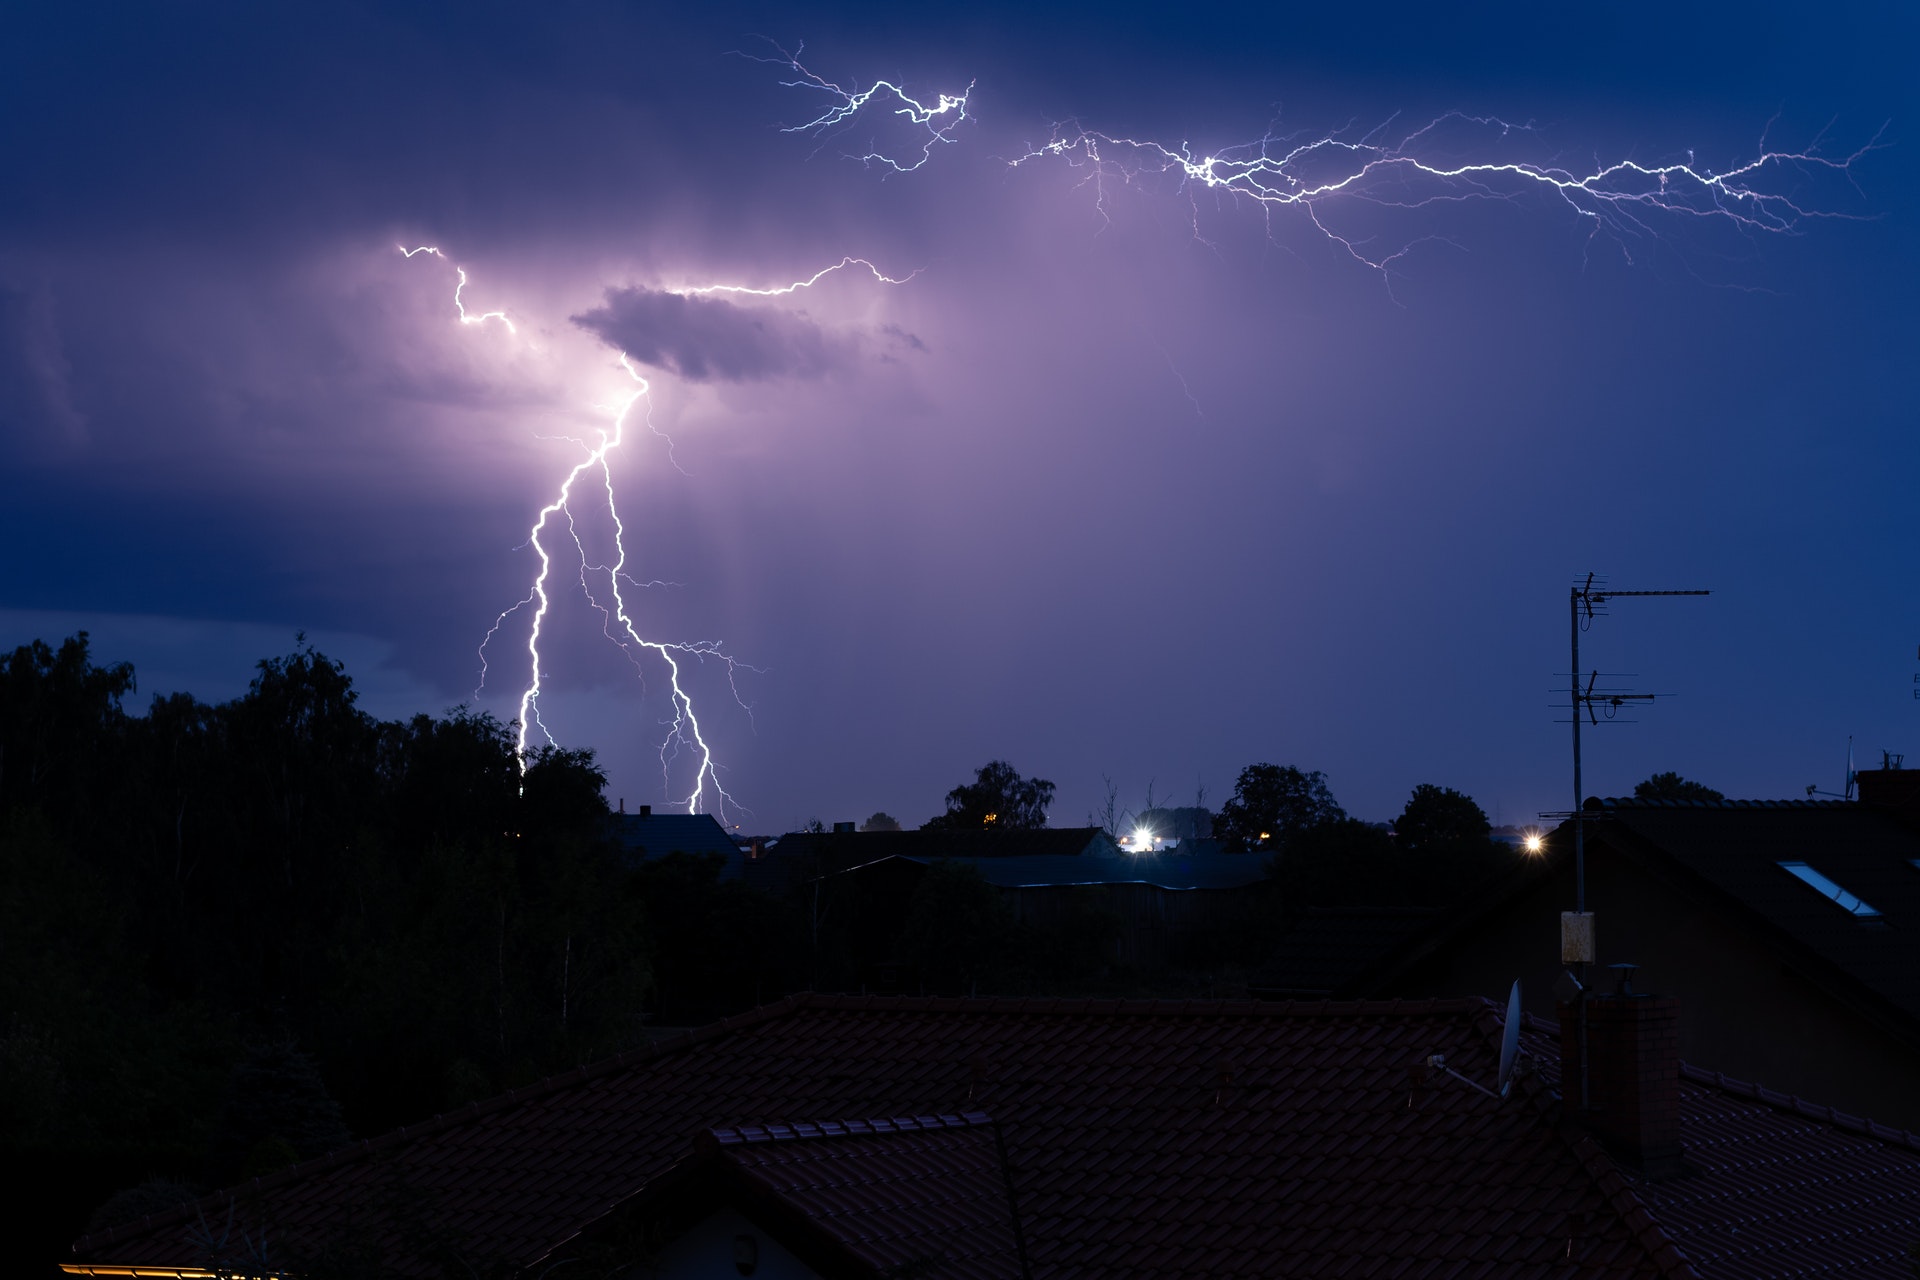 Rwanda Meteorological Agency has predicted heavy rains mixed with strong winds and lightning strikes from March 21 to March 31.